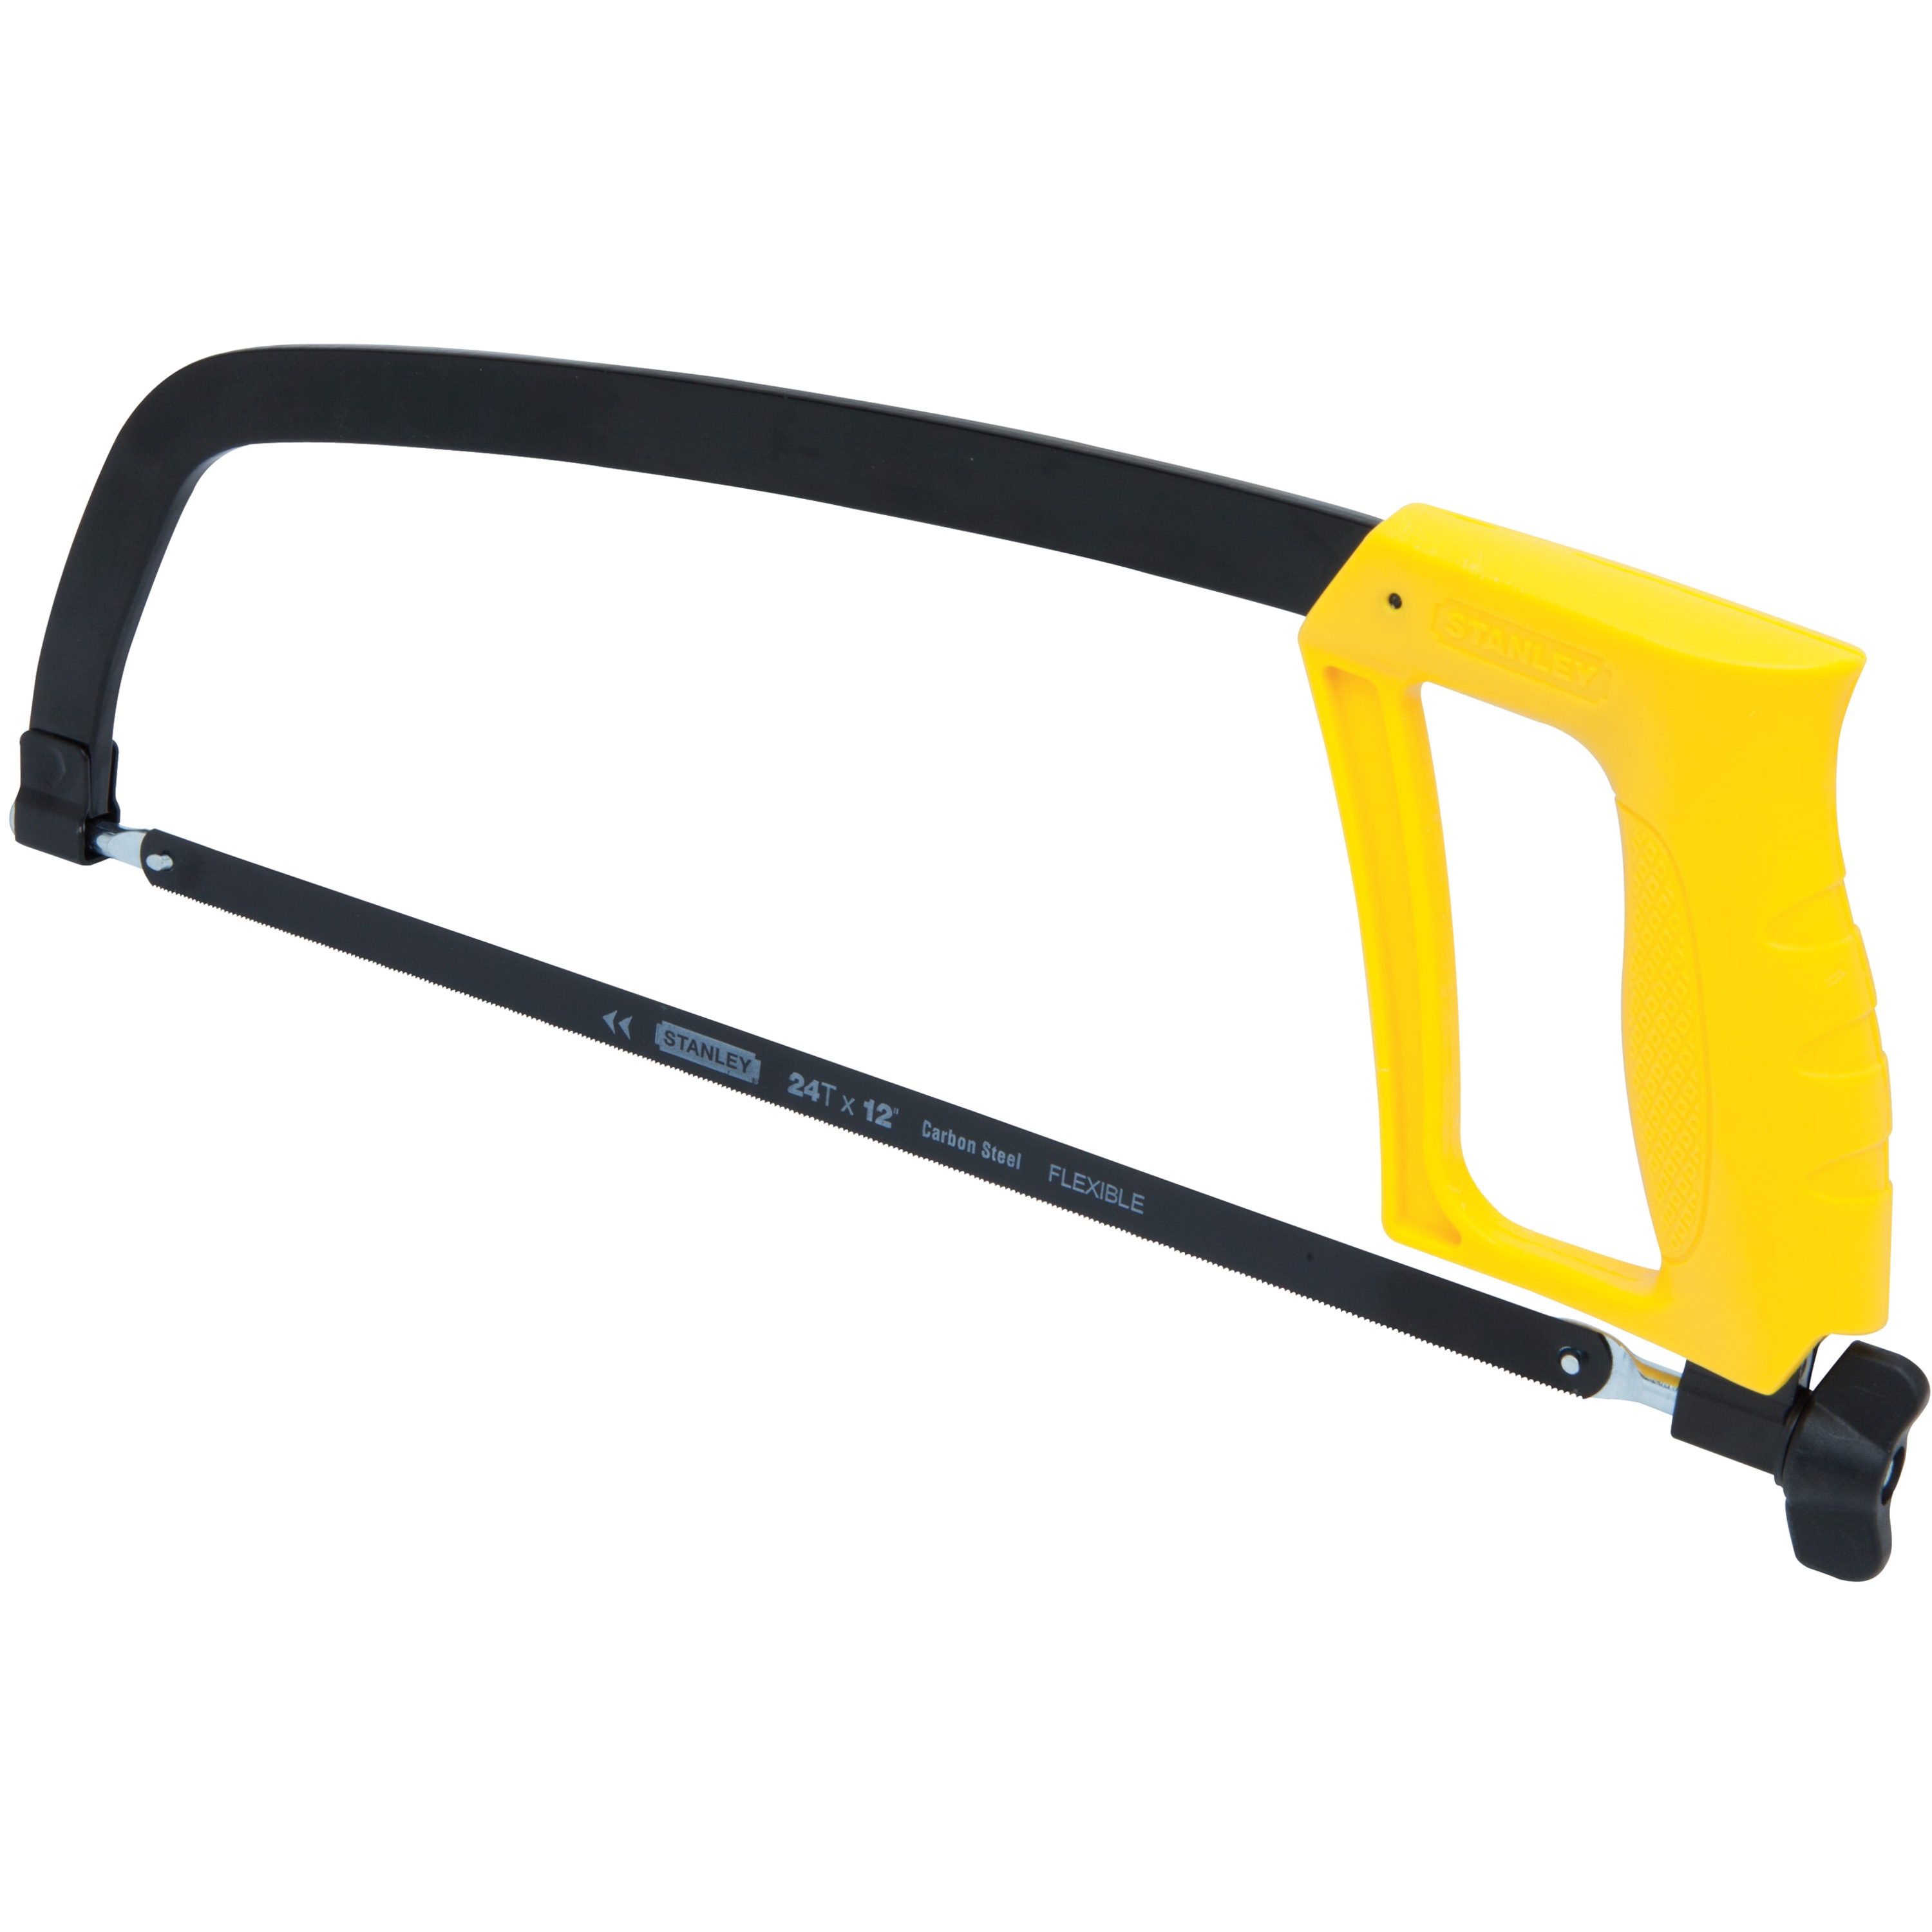 Stanley Tools - 12 in Solid Frame Hacksaw - STHT20138